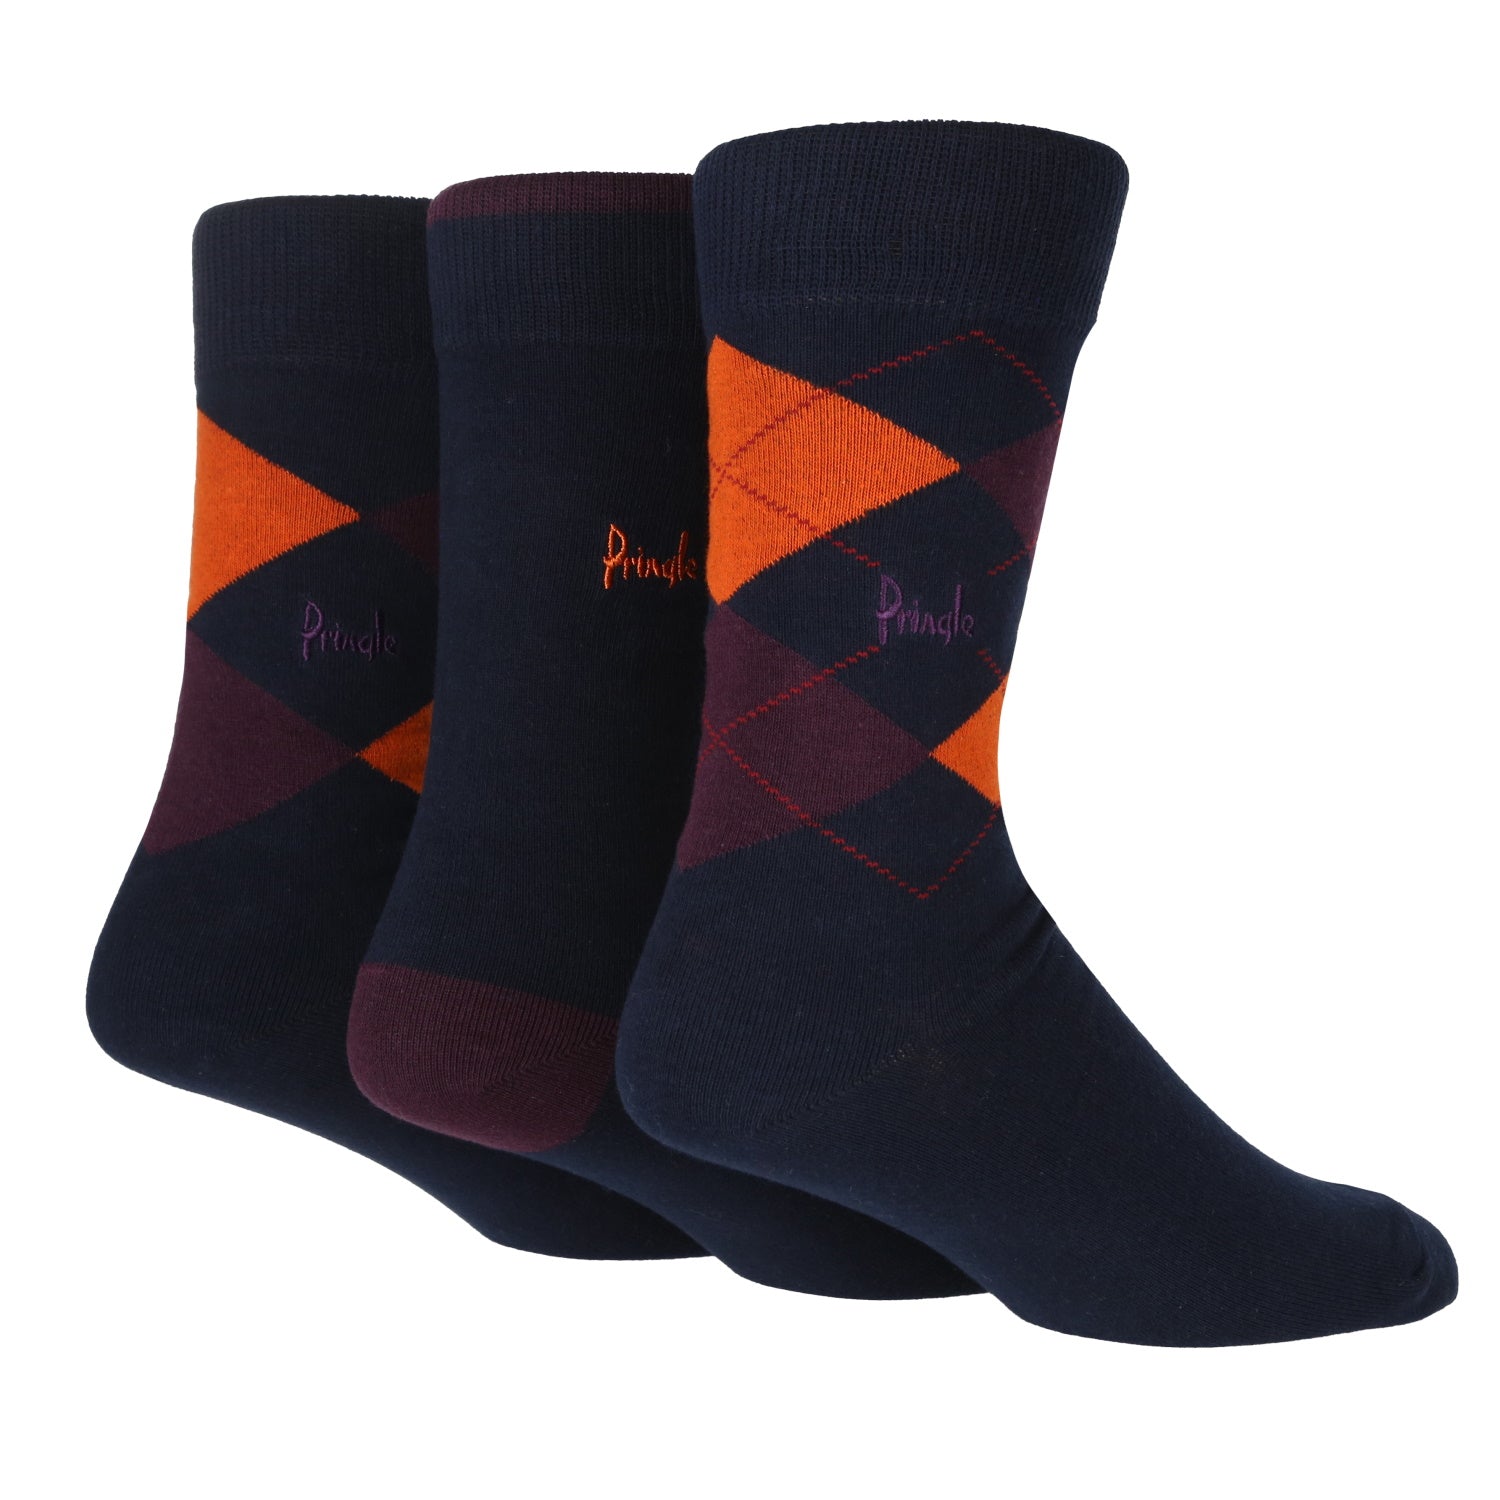 Pringle 3 Pack Boxed Socks - Navy 3 Shaws Department Stores